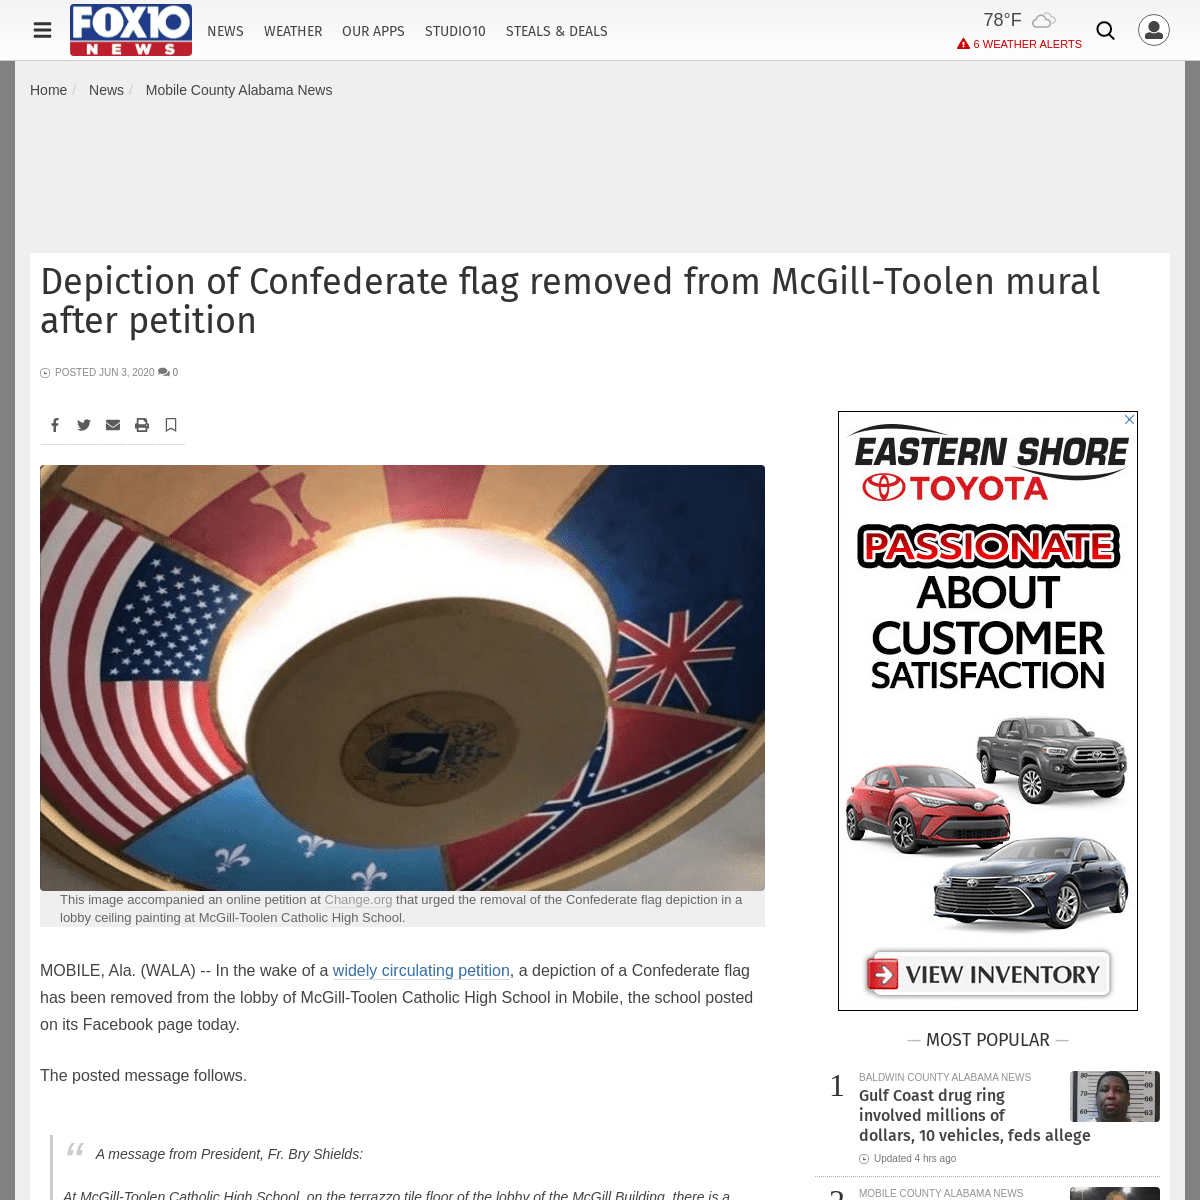 A complete backup of https://www.fox10tv.com/news/mobile_county/depiction-of-confederate-flag-removed-from-mcgill-toolen-mural-a